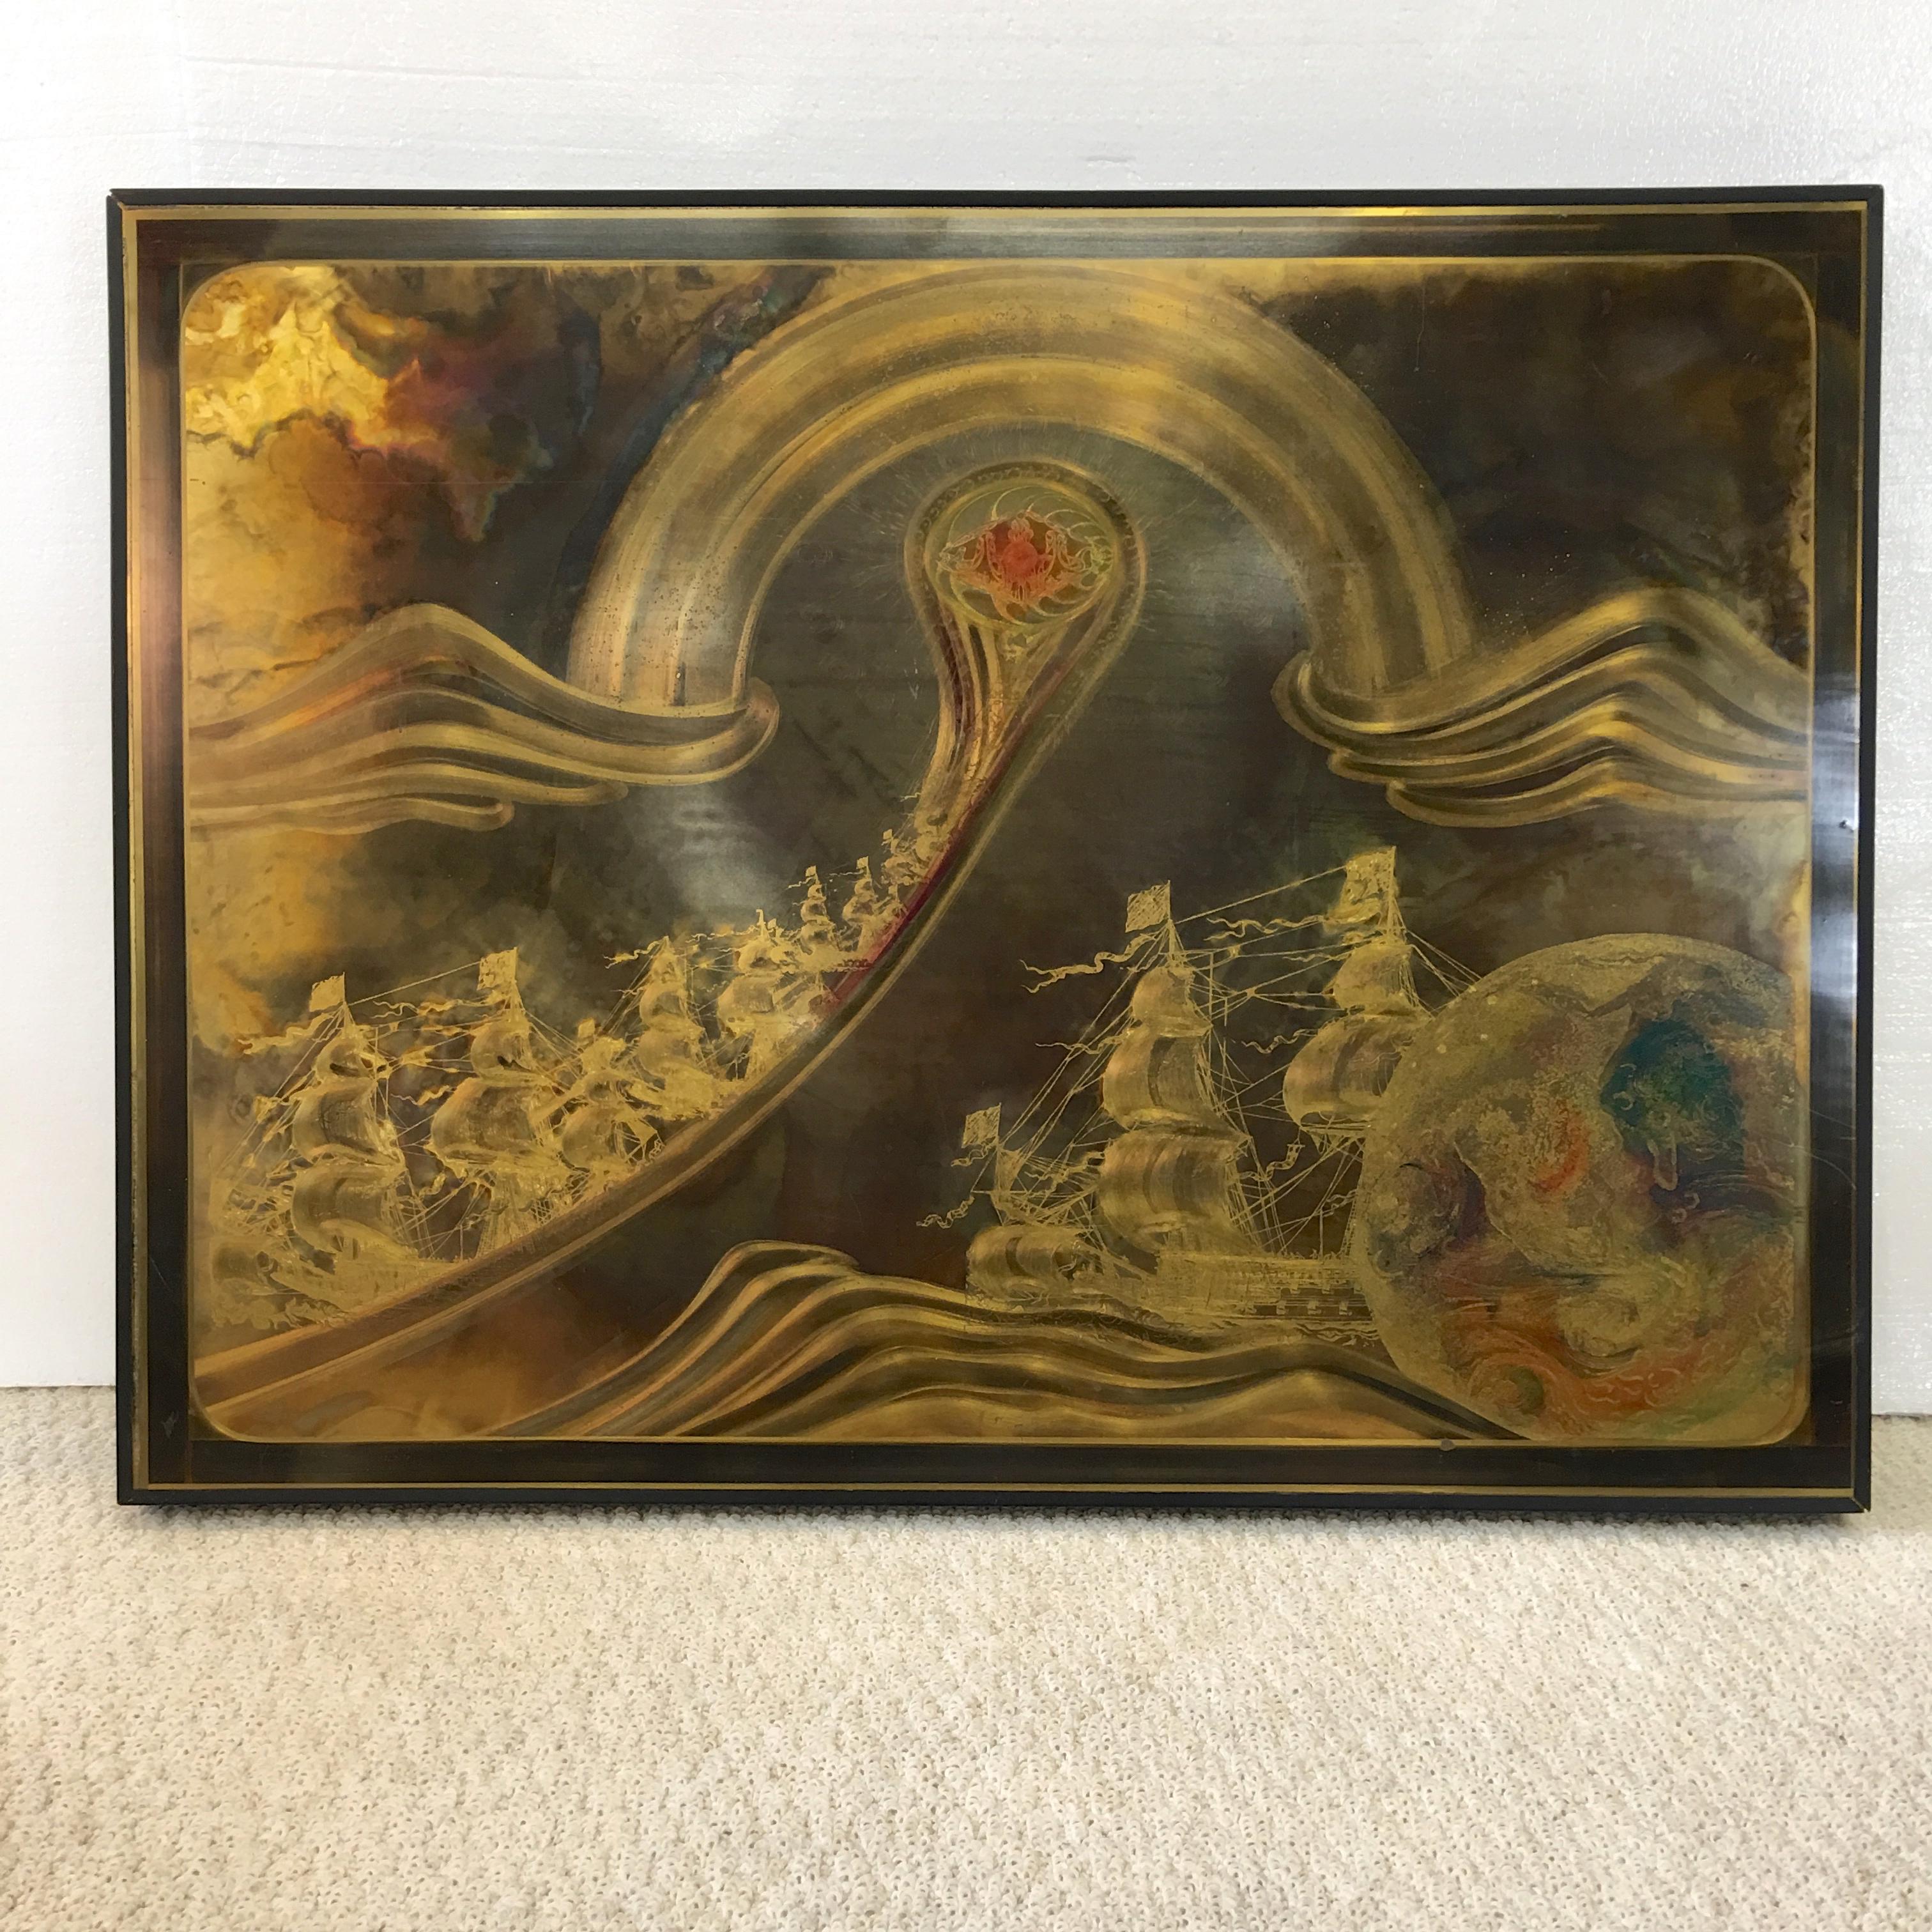 Framed acid etched brass panel by Bernhard Rohne. 32 inches wide by 24 inches high. Signed and dated lower left 